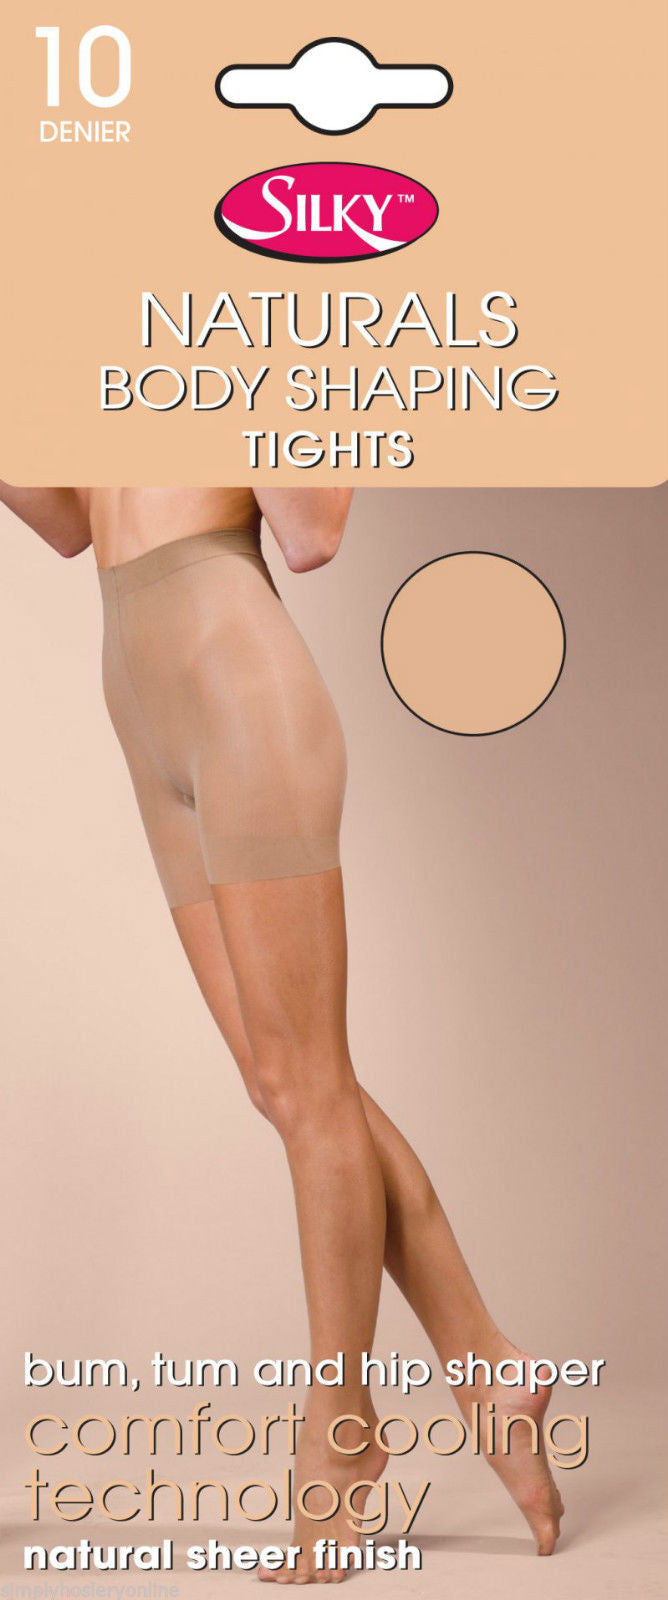 Silky Naturals Body Shaping Bum Tum Thigh Control Top Tights 10 Denier –  Simply Hosiery Online